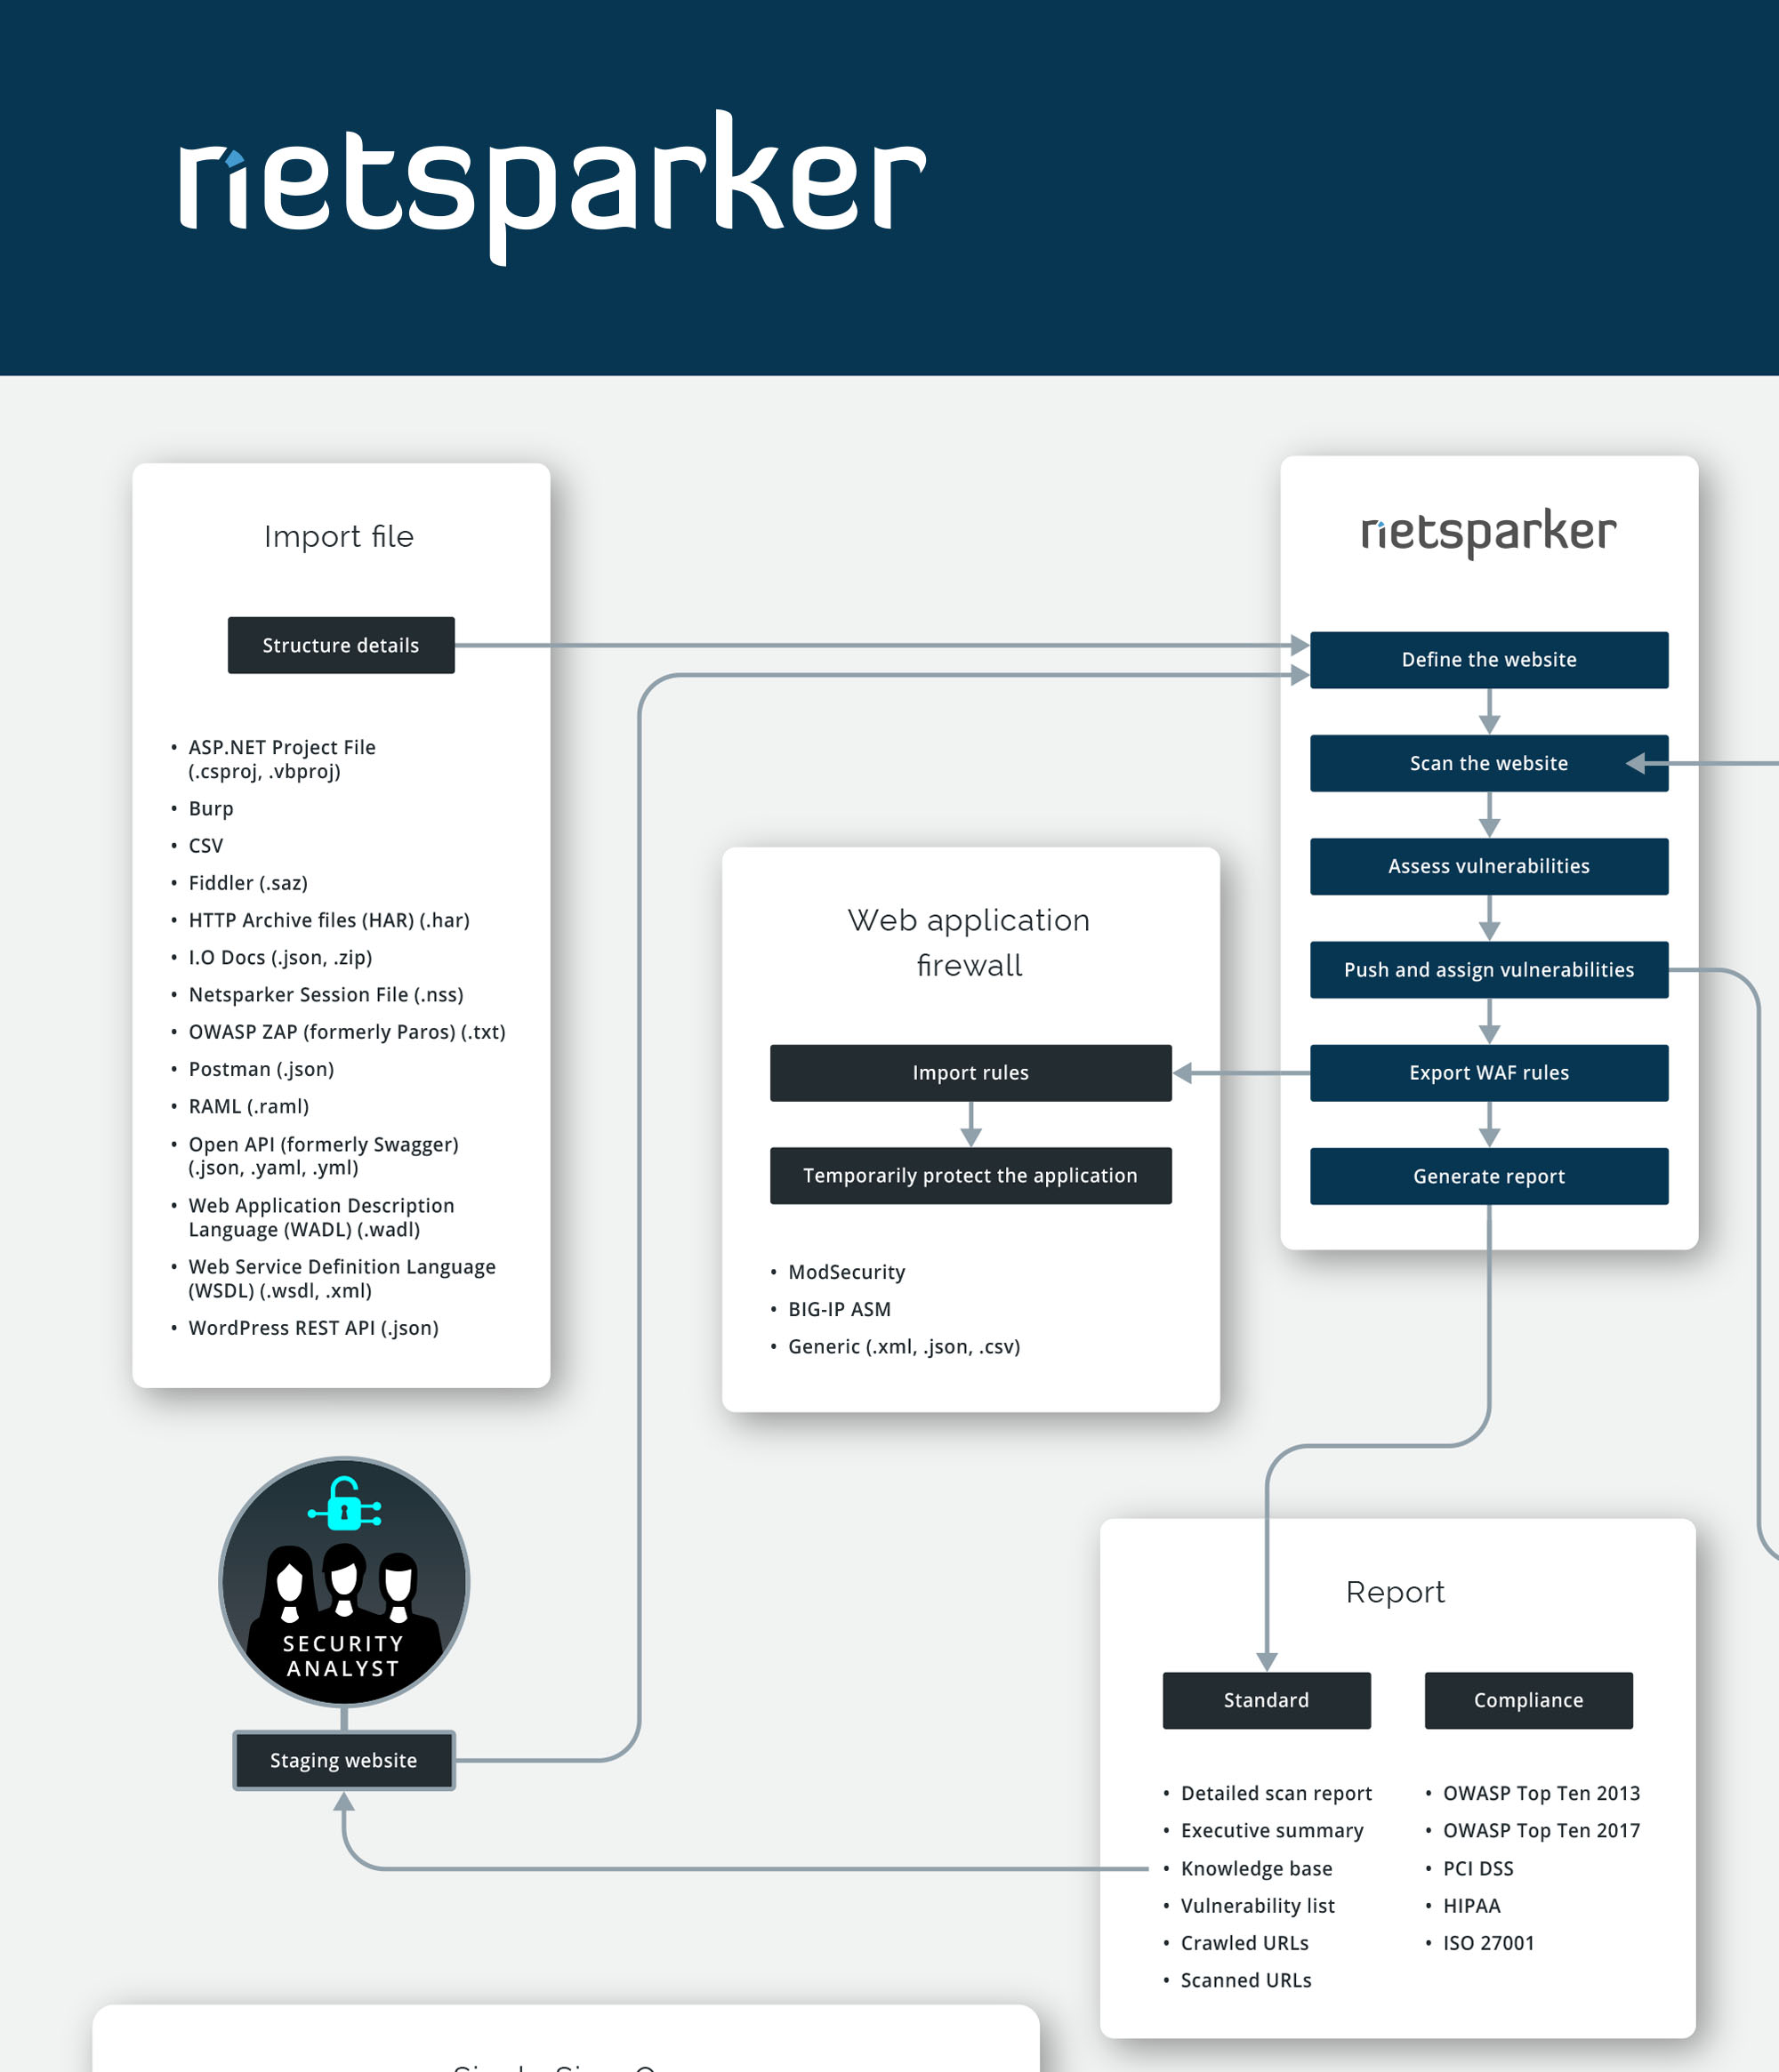 Netsparker is a complete web application security solution